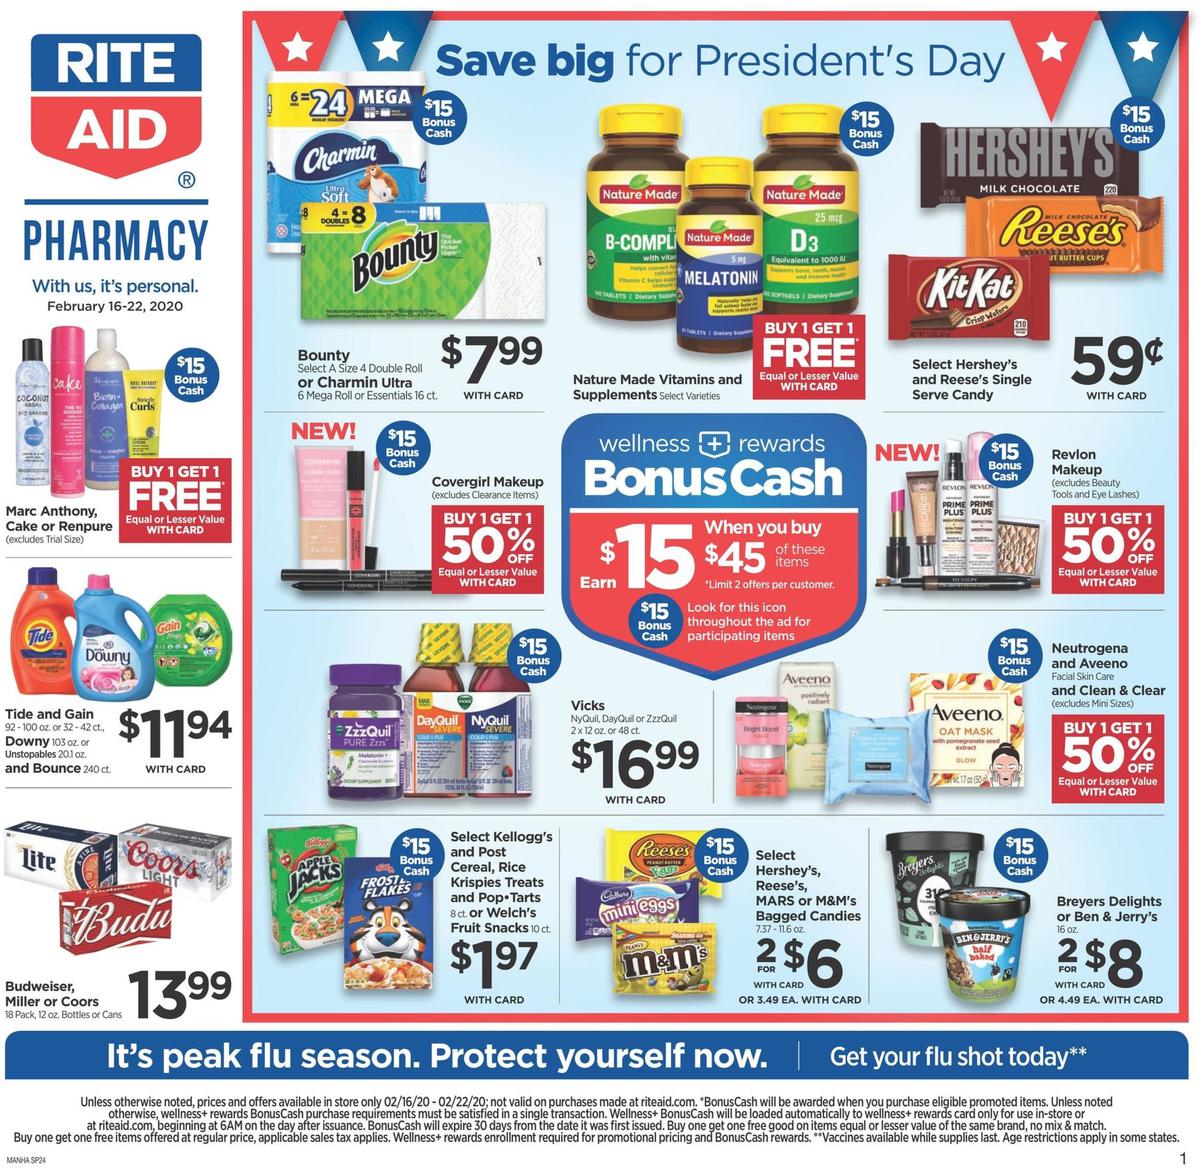 Rite Aid Weekly Ad from February 16